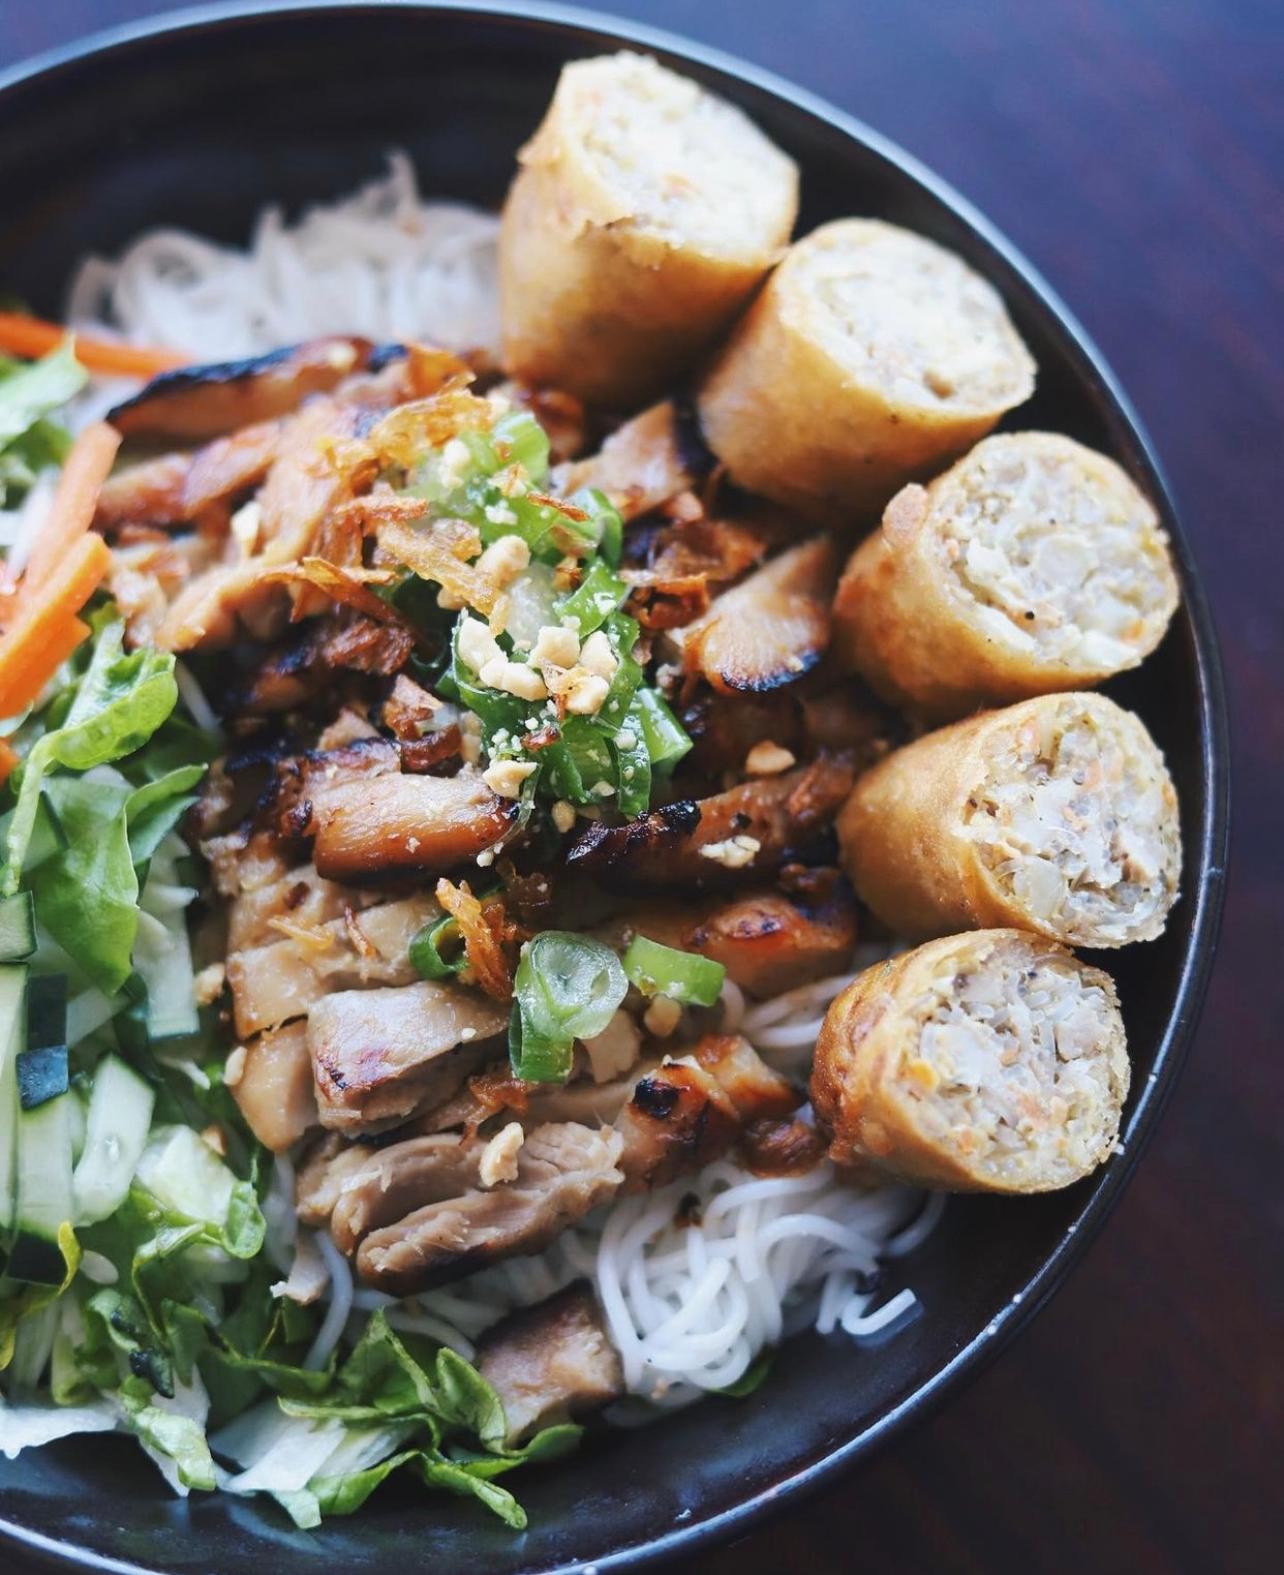 Vermicelli Bowl with Egg Roll